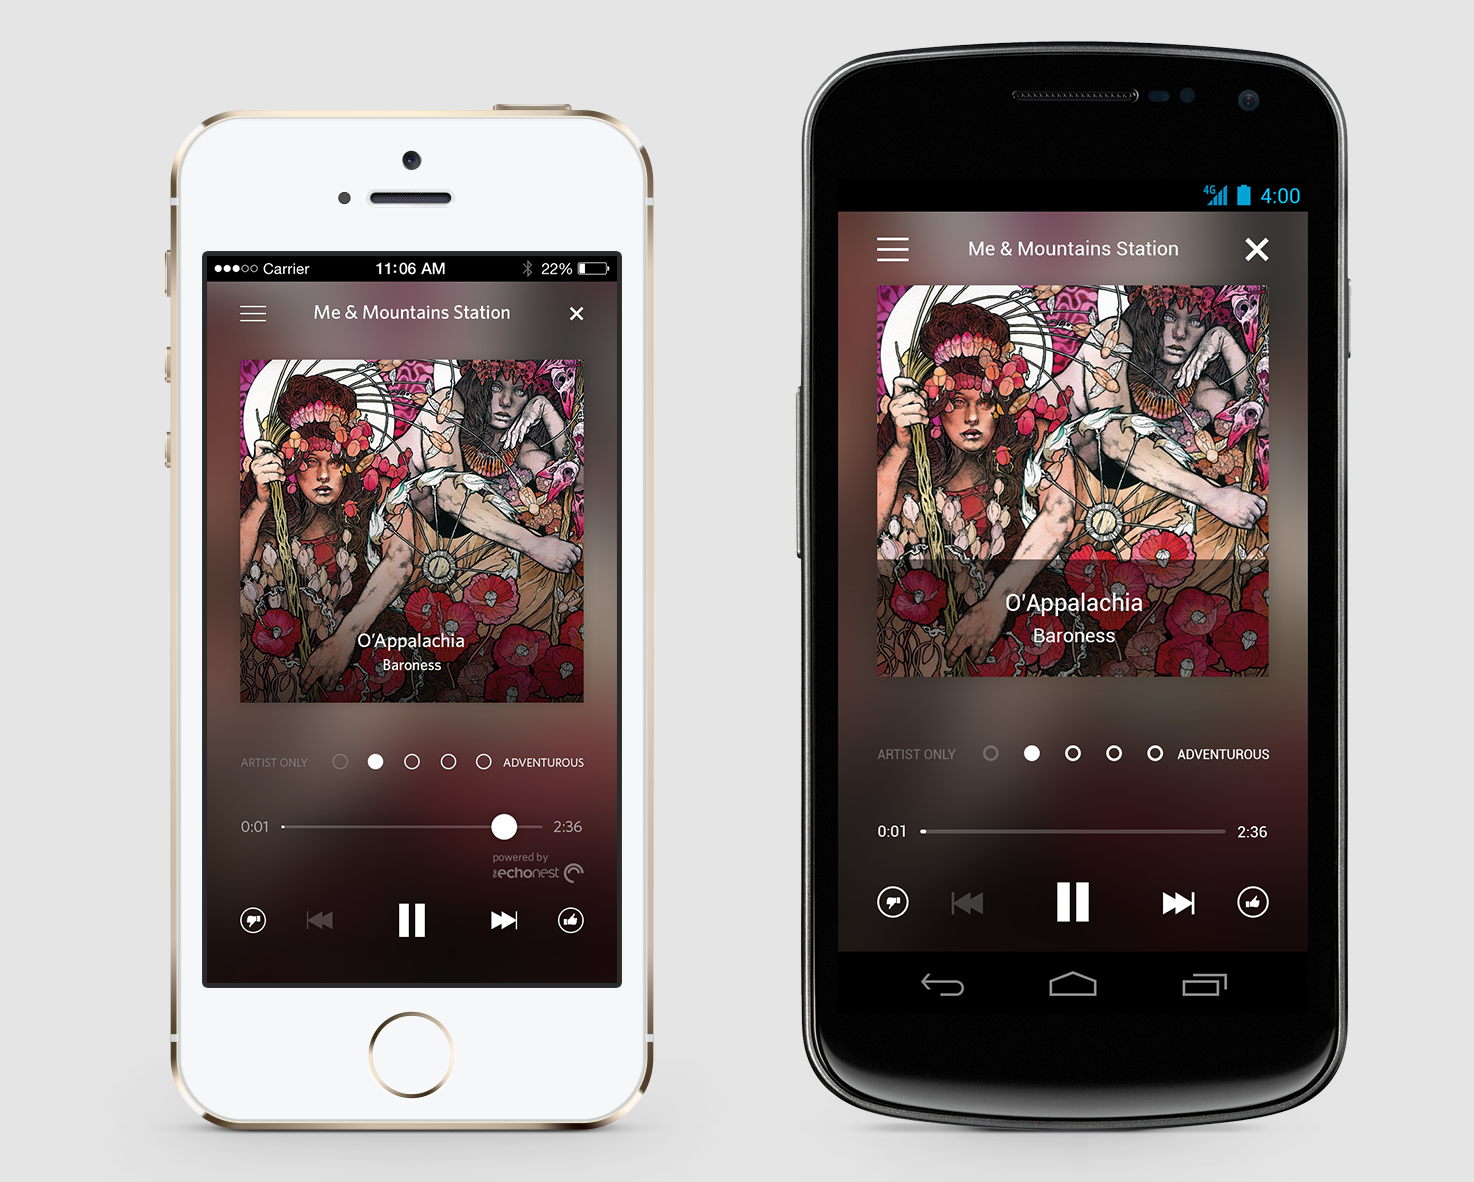 Rdio-station-player-iphone-android